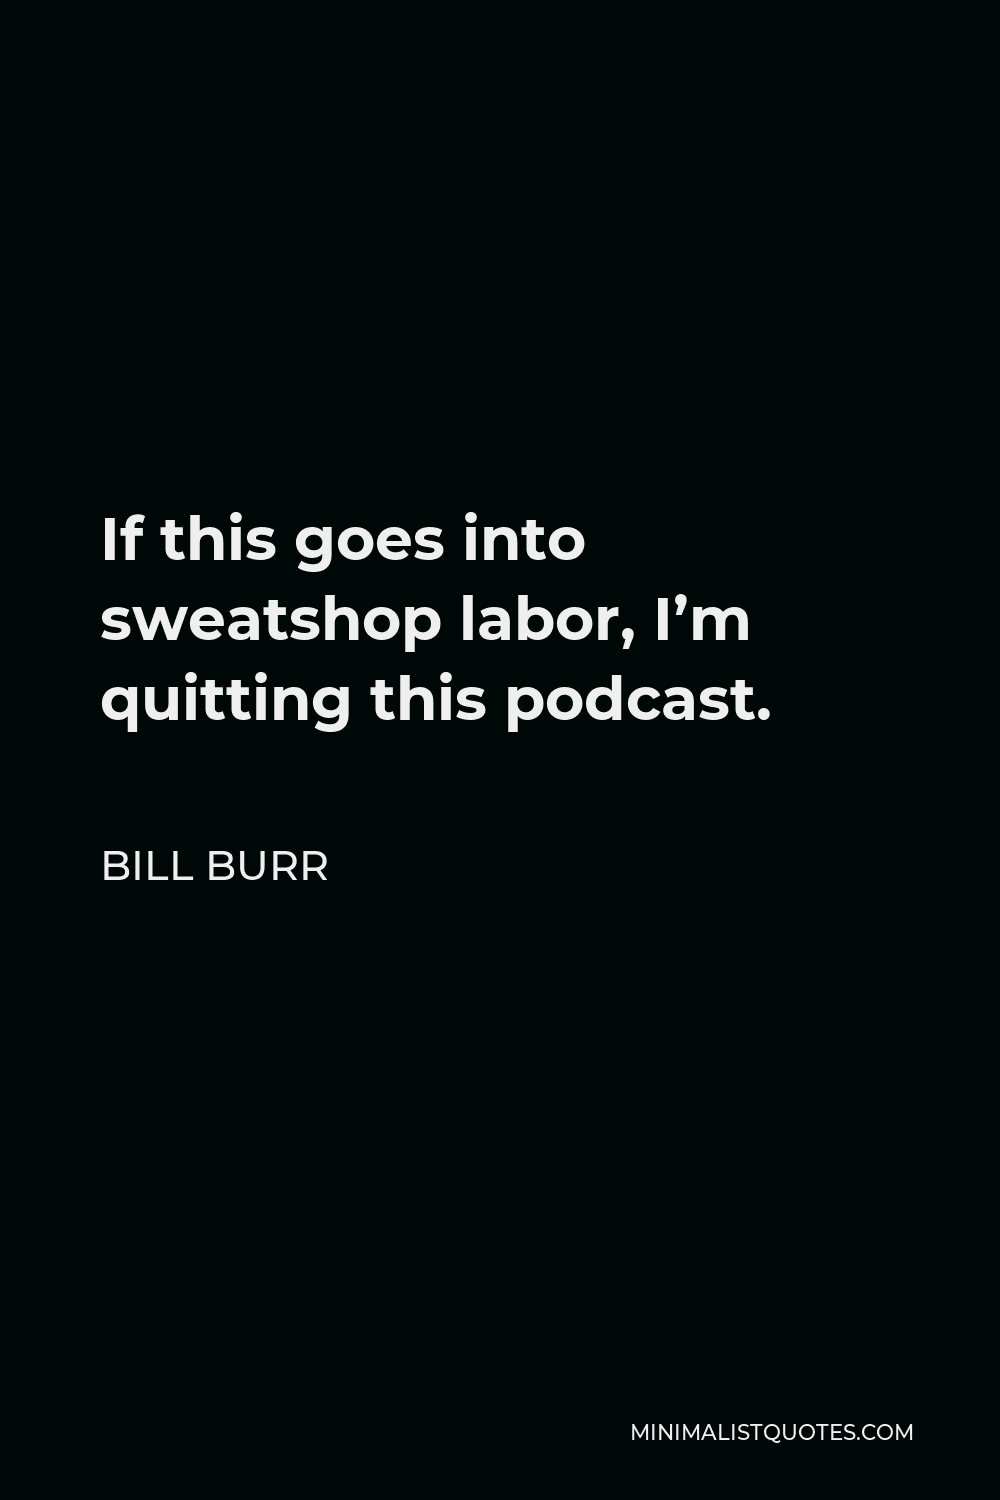 Bill Burr Quote - If this goes into sweatshop labor, I’m quitting this podcast.